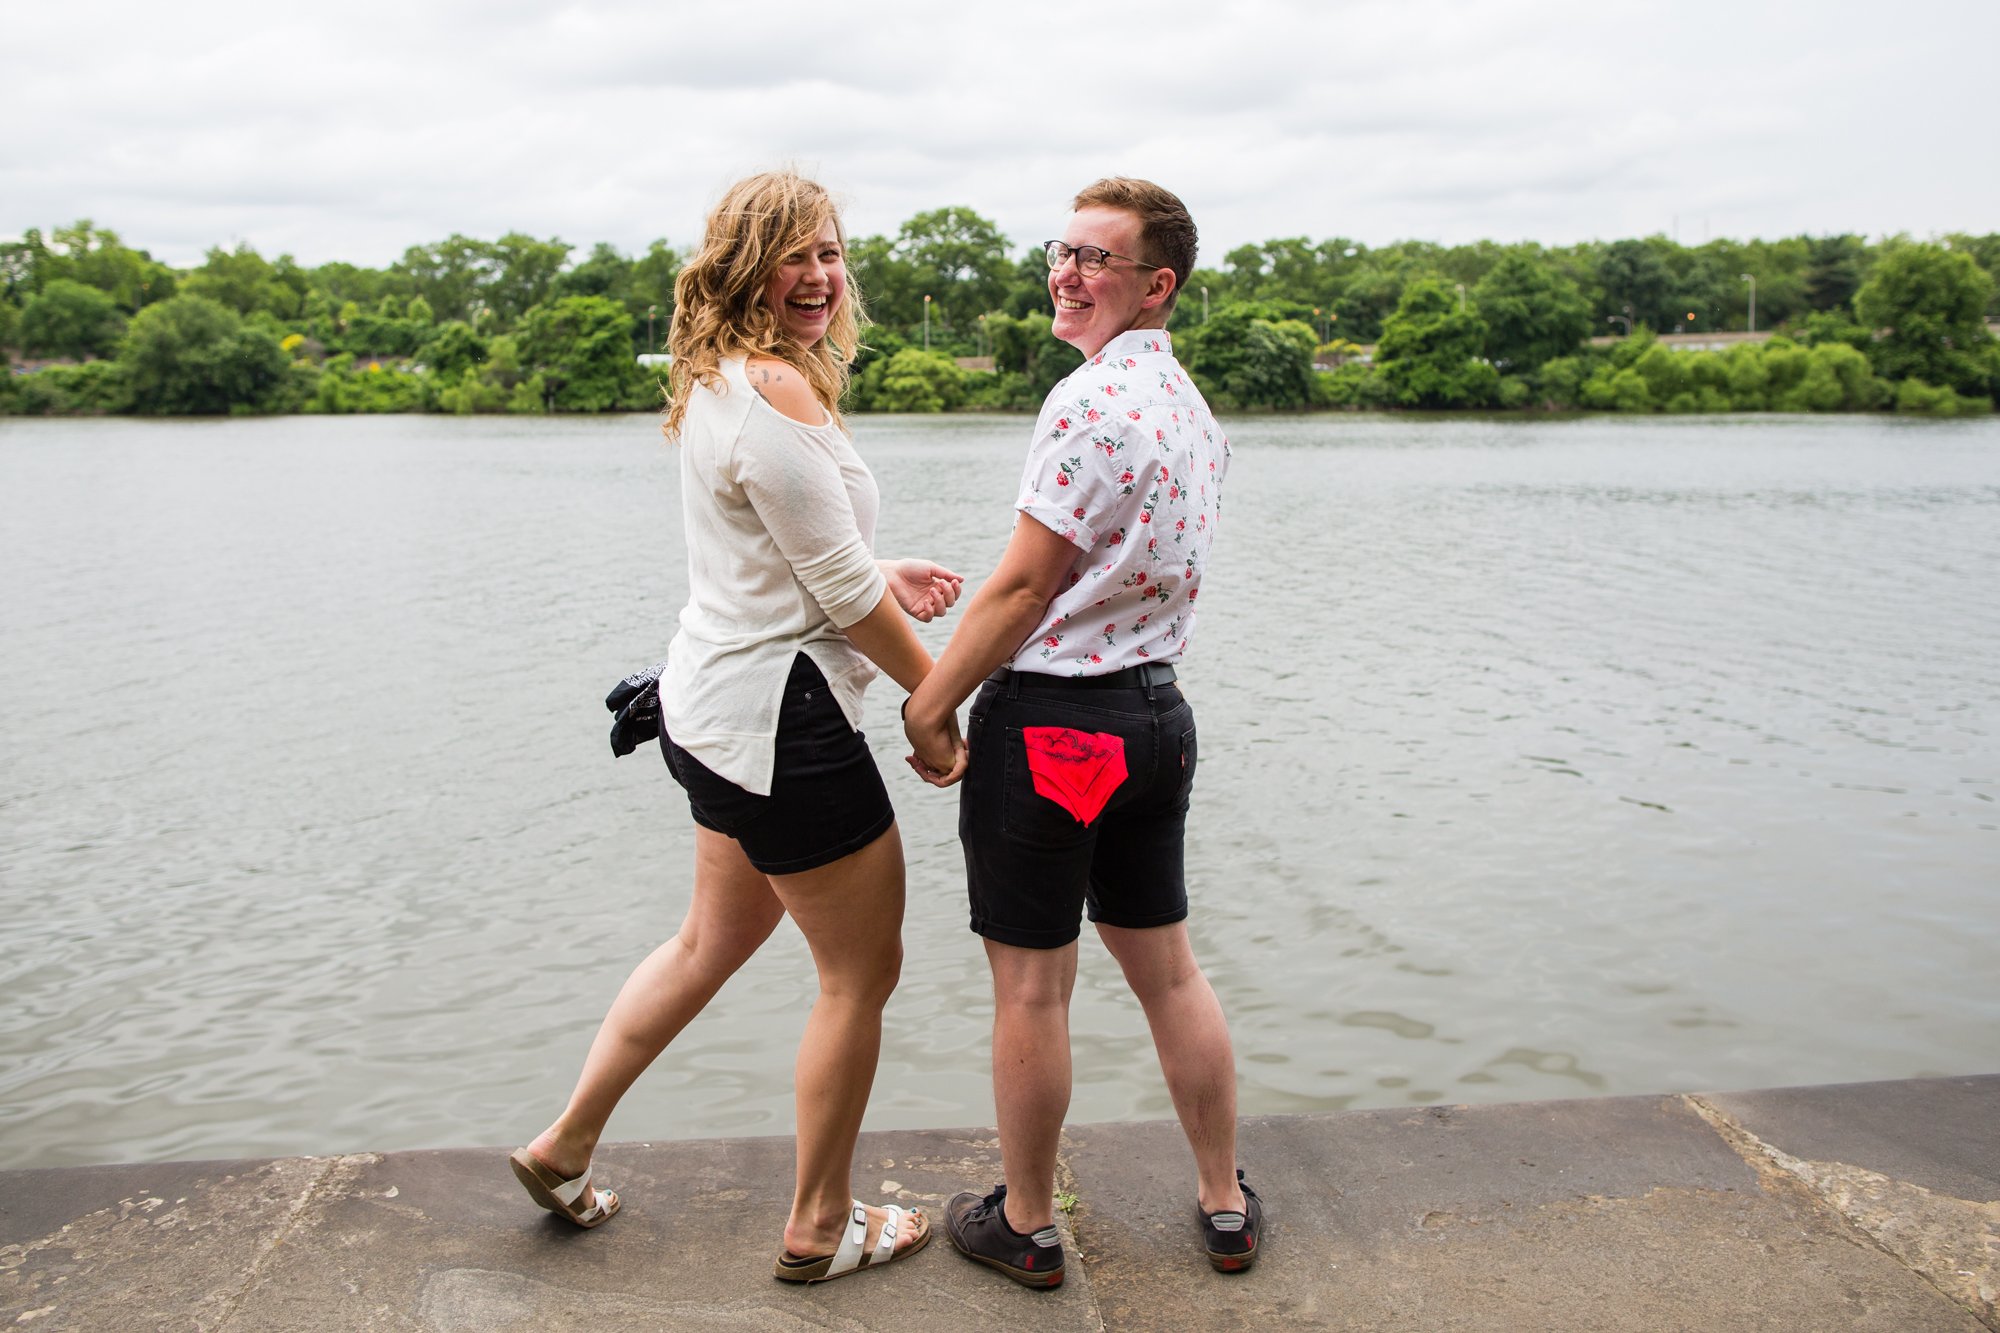 Wedding couple poses by Schuylkill River after eloping, Philadelphia photographer